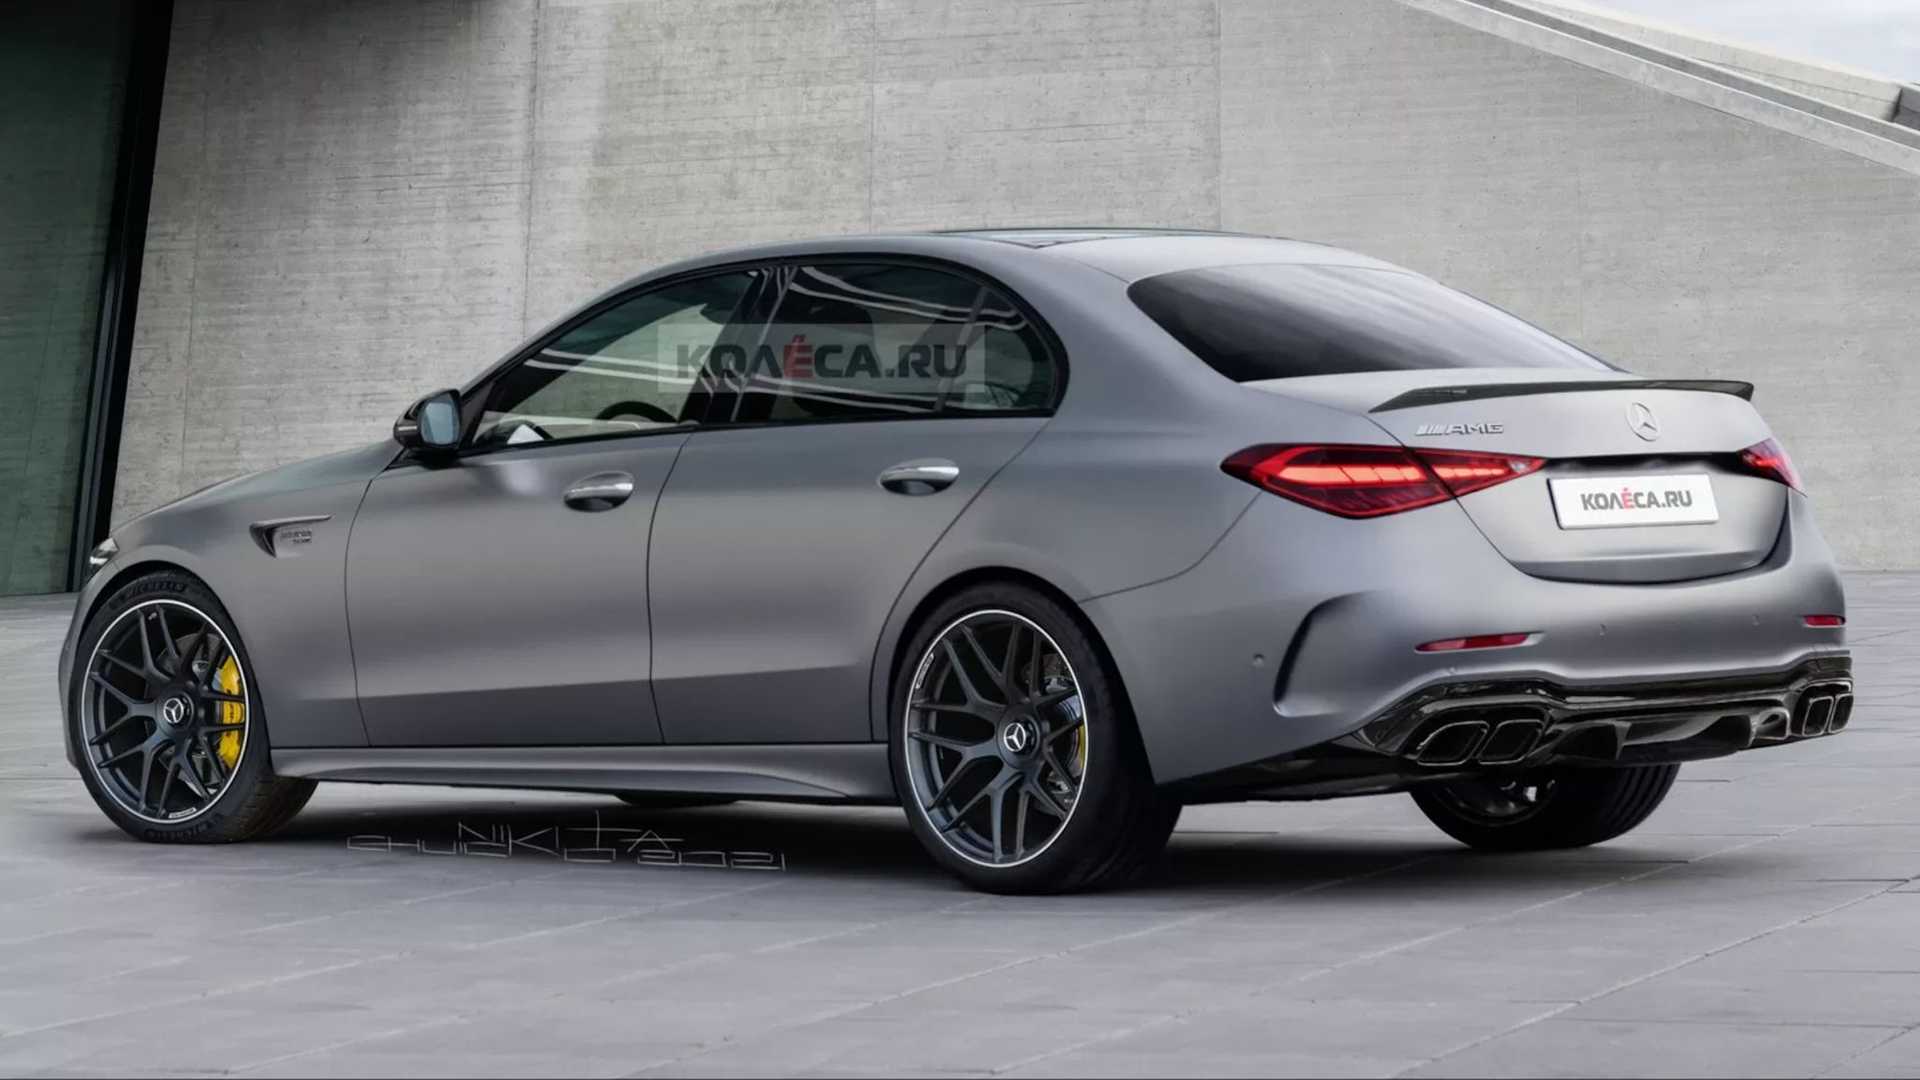 2023 Mercedes-AMG C63 S E Performance Could Pack As Much As 643 HP (480 kW)